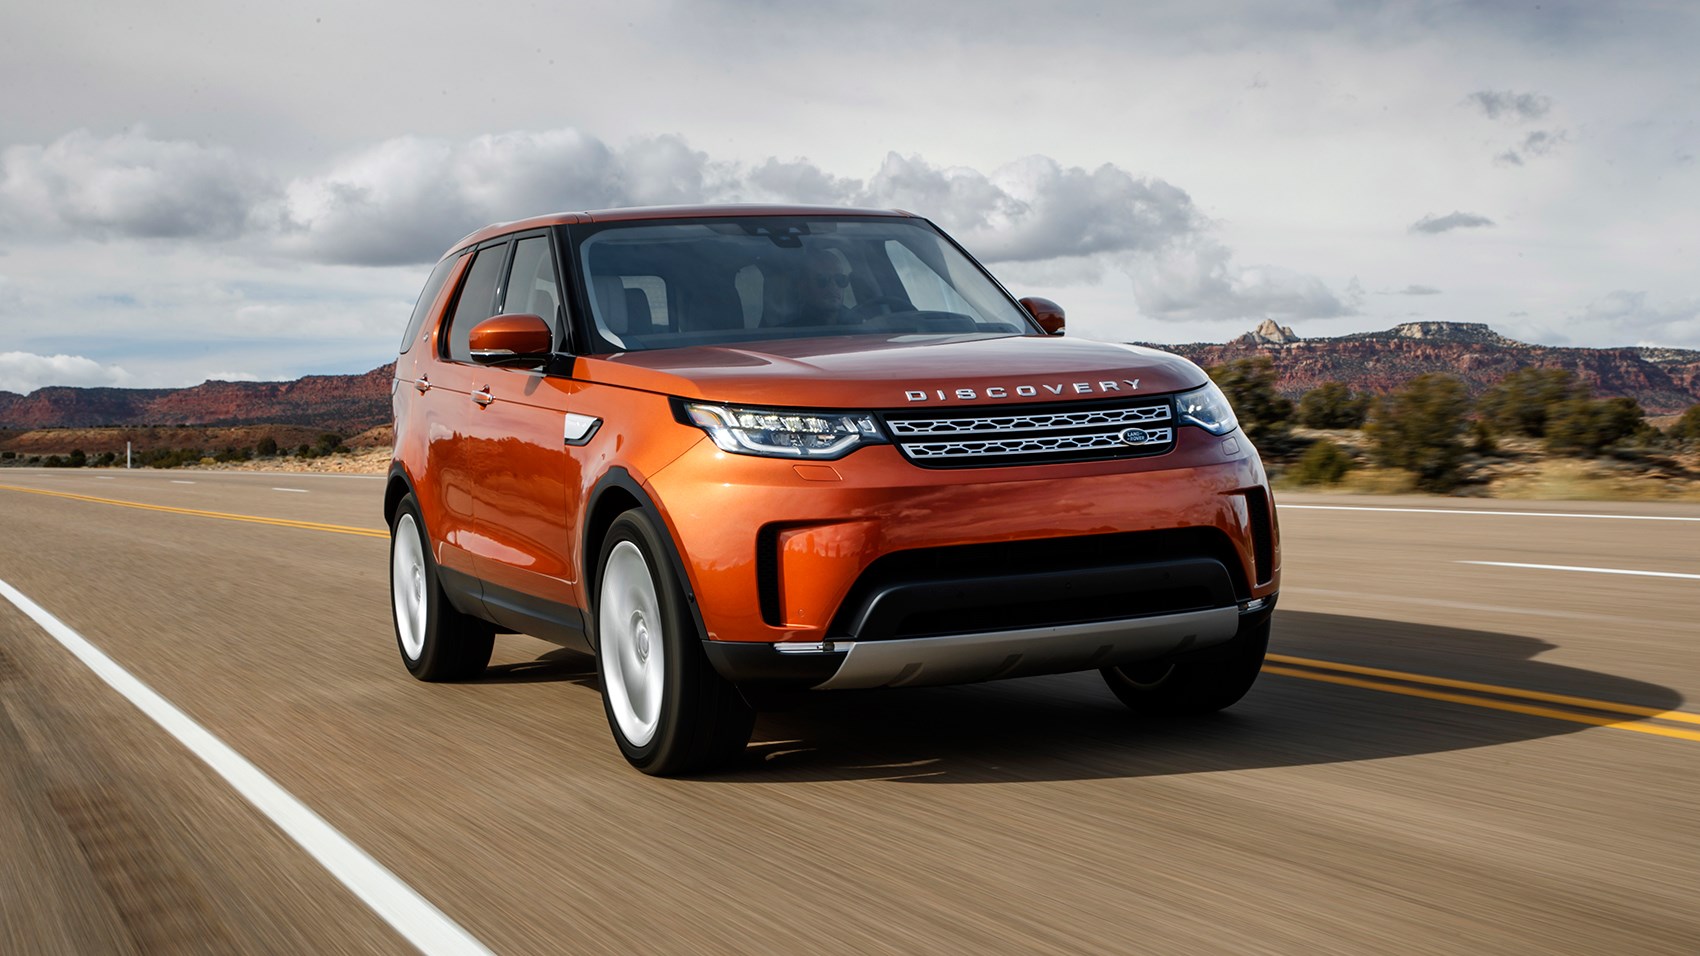 The CAR magazine Land Rover Discovery 5 review